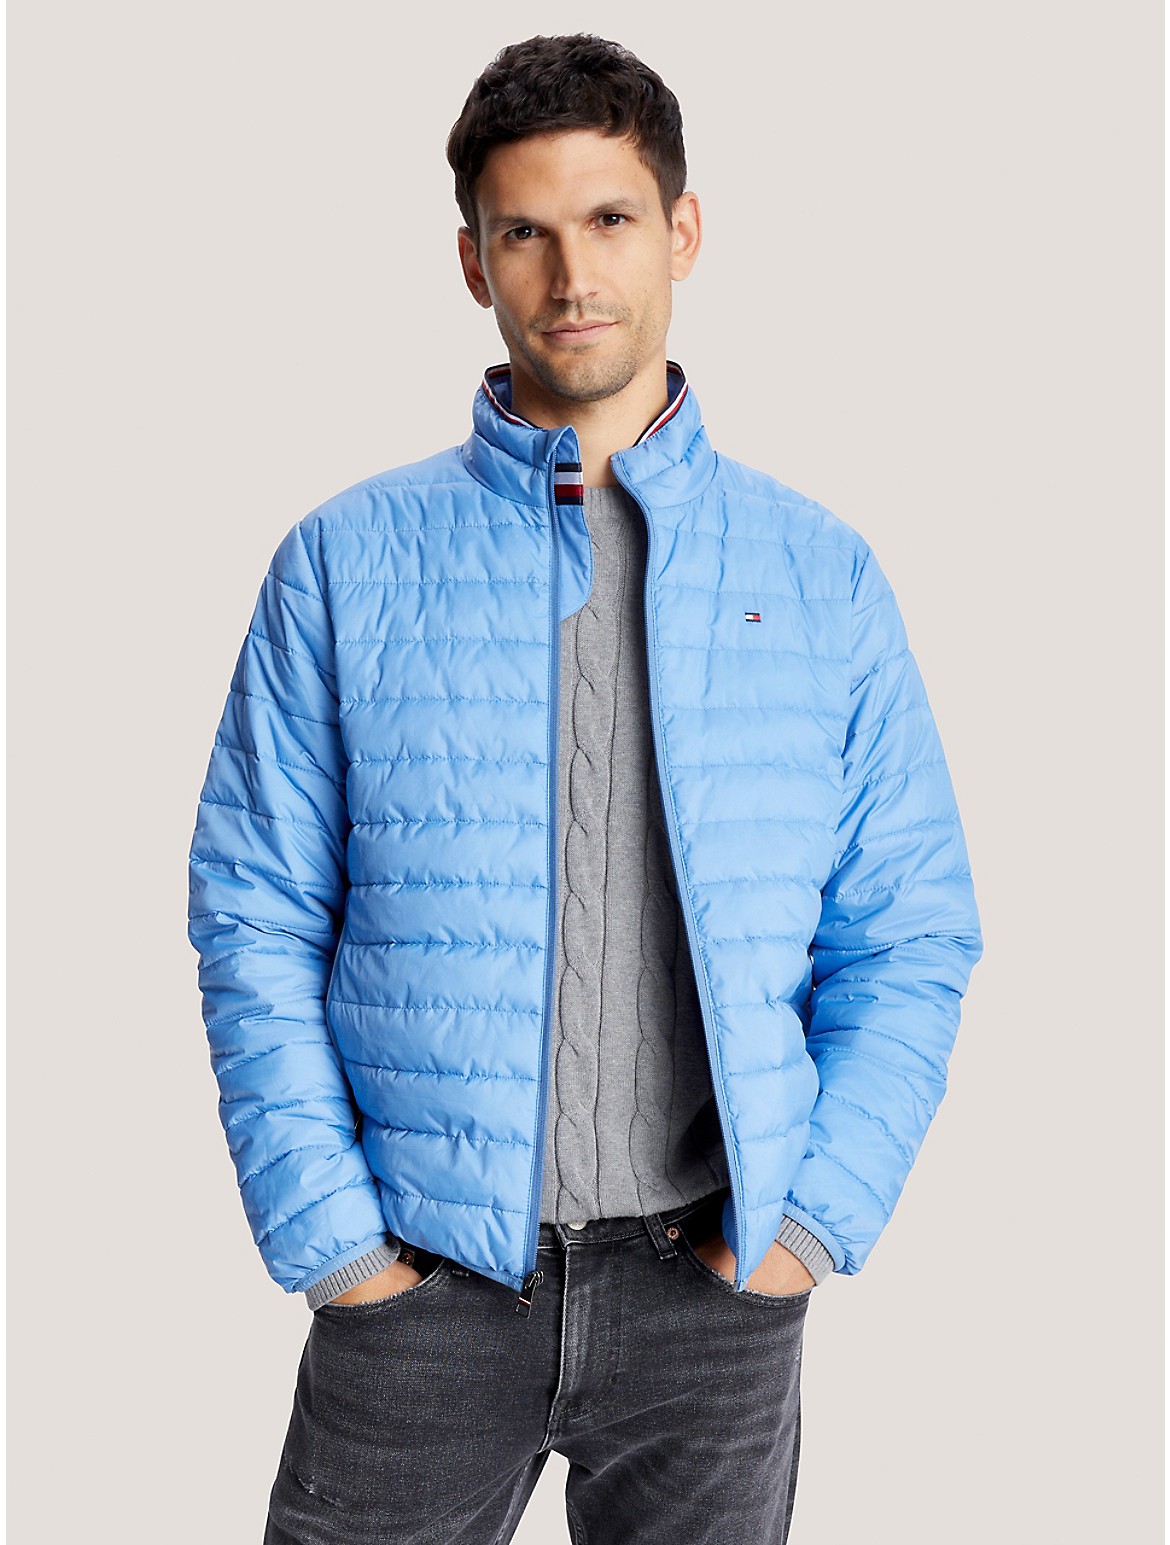 Tommy Hilfiger Men's Recycled Packable Jacket